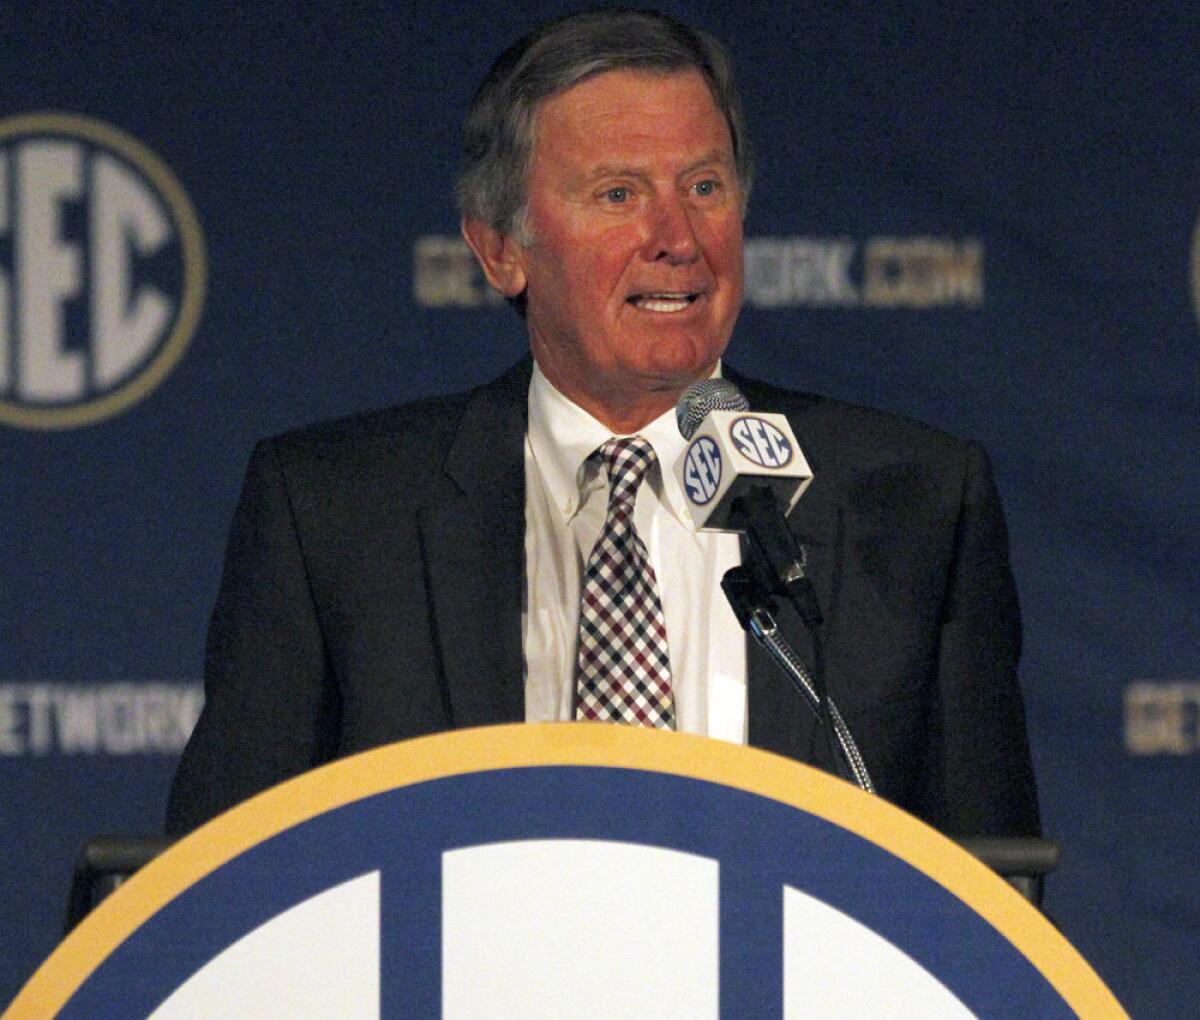 South Carolina football Coach Steve Spurrier speaks during the Southeastern Conference's media days last month.